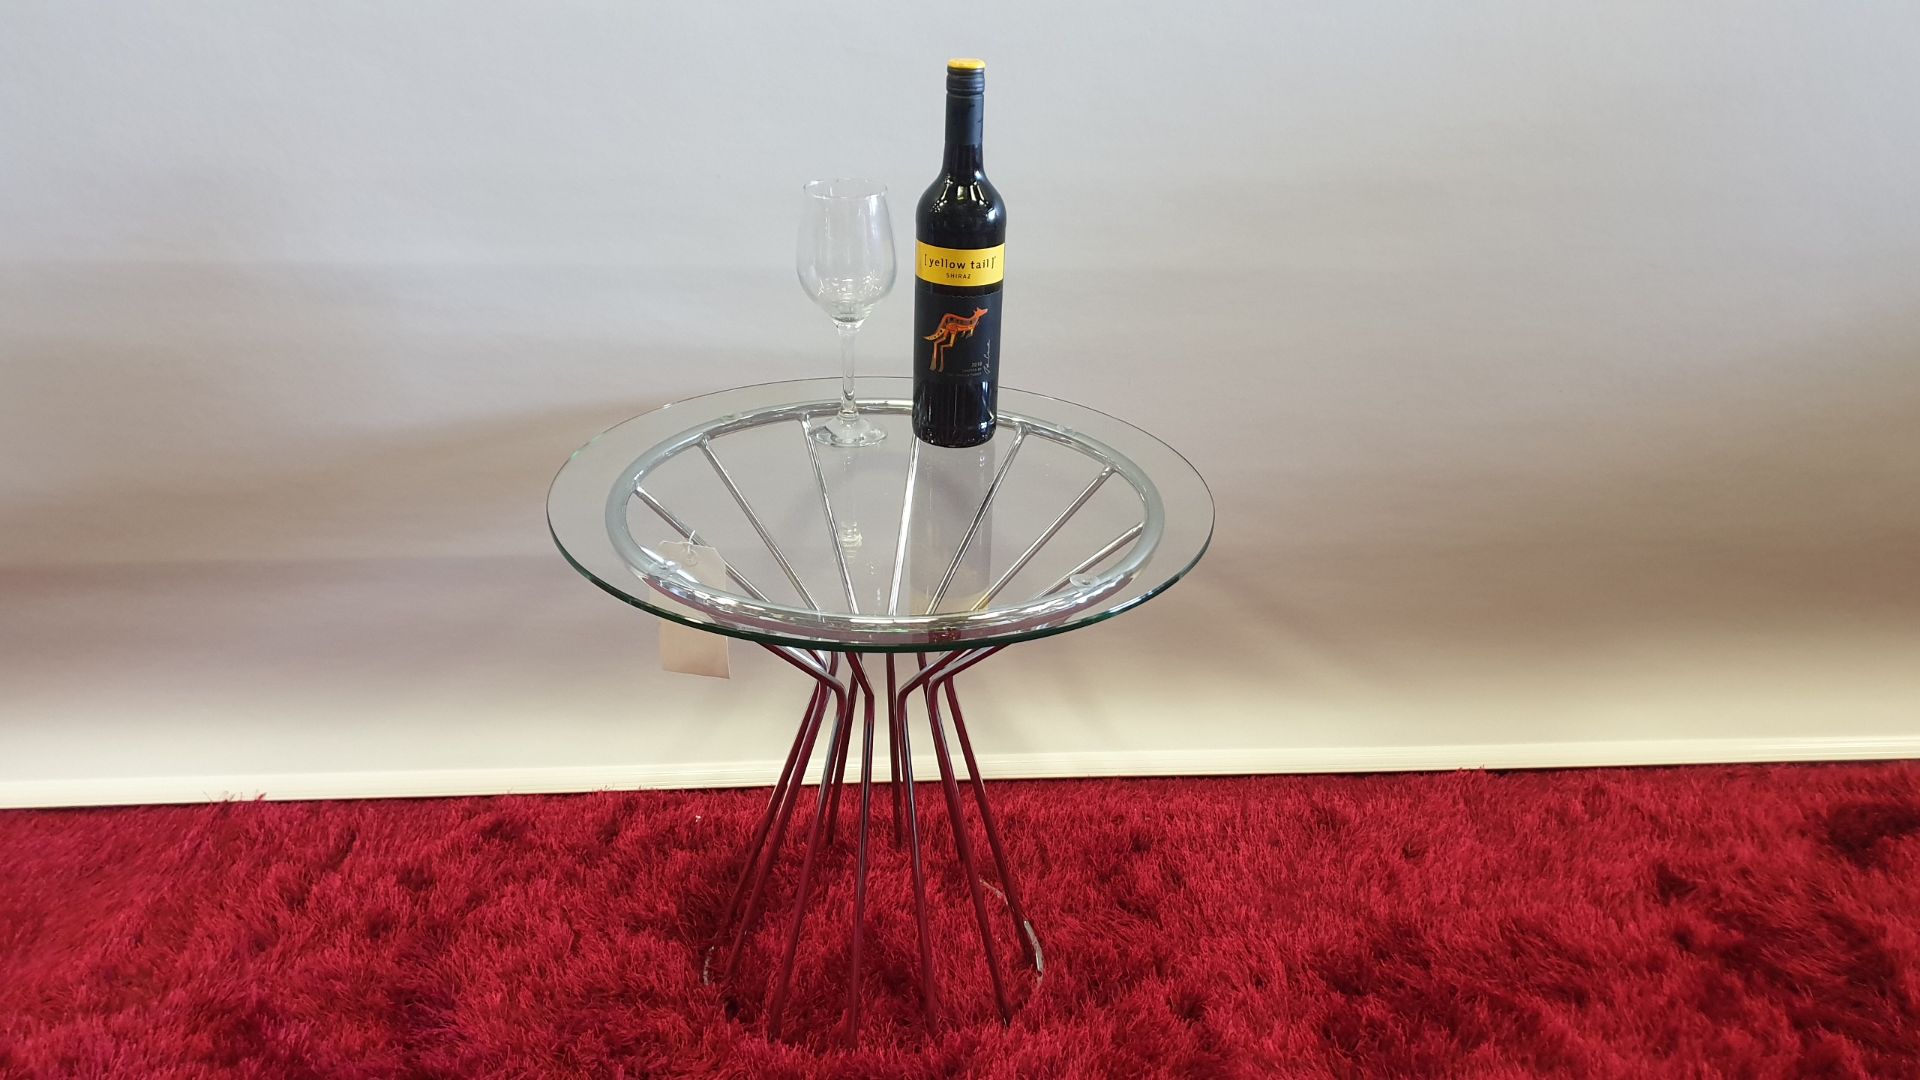 BRAND NEW CHROME CLEAR GLASS SIDE TABLE SIZE 520 MM DIAMETER / HEIGHT 500 MM RRP £169.00